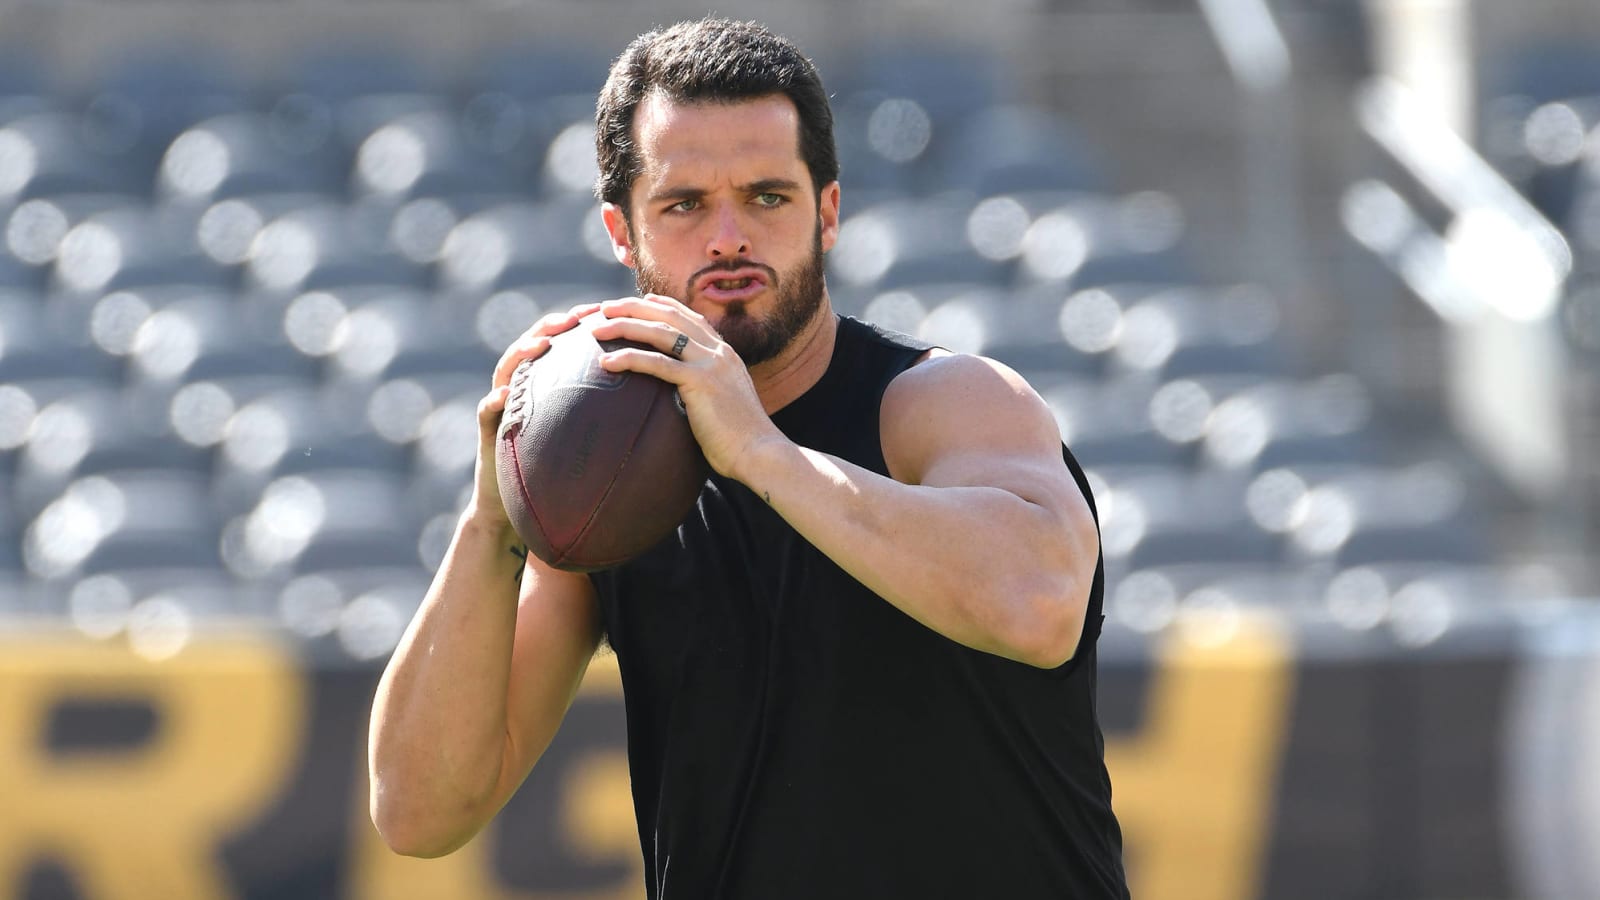 Raiders QB Derek Carr 'good to go' after ankle scare